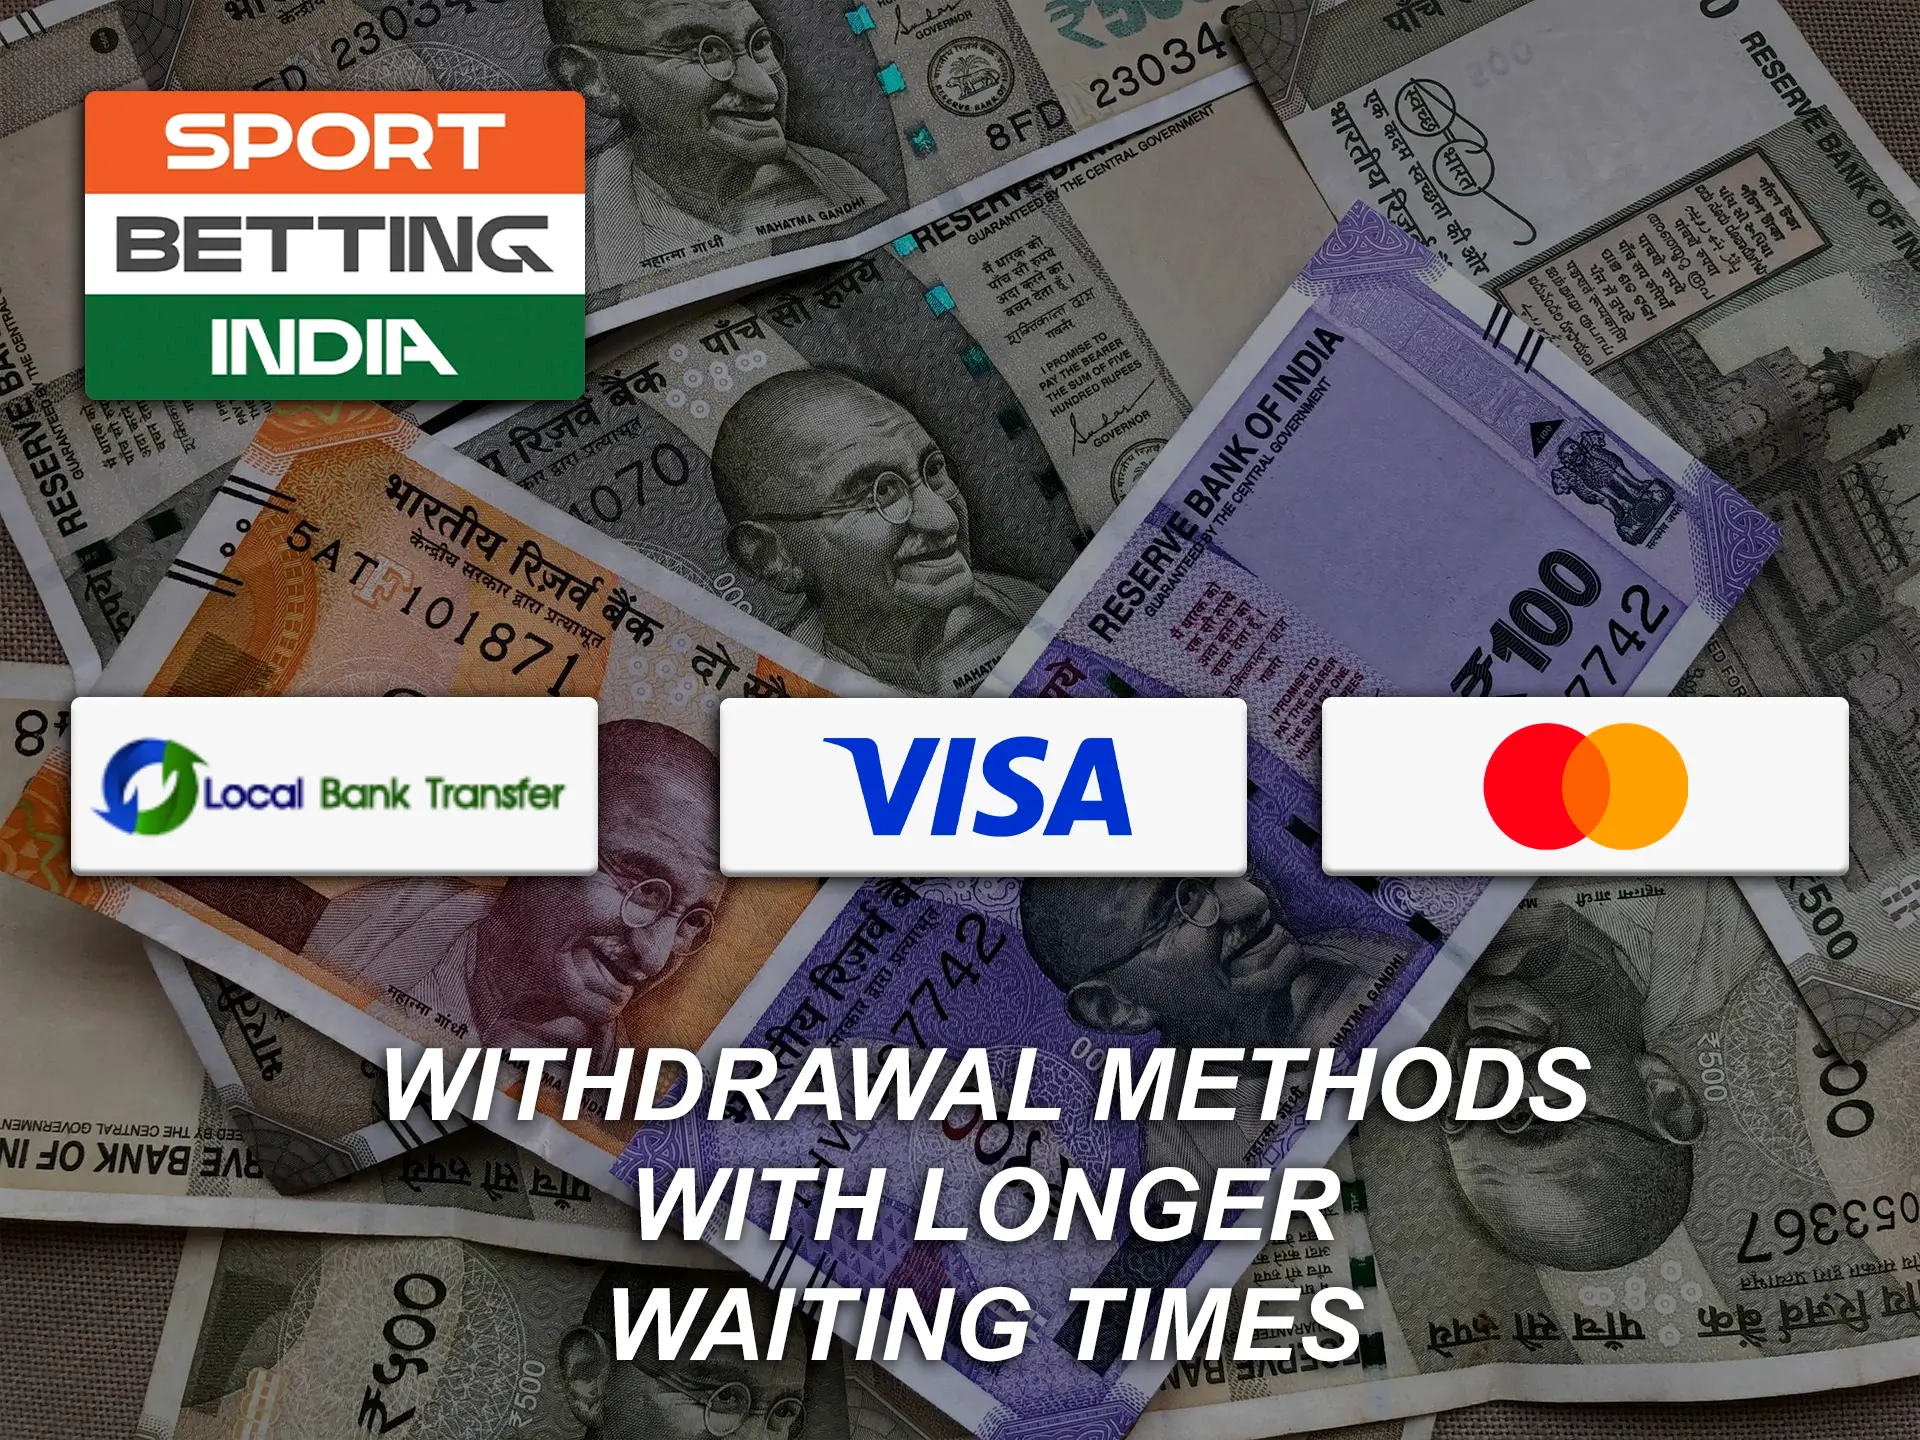 Use your Visa and Mastercard bank cards to withdraw money.